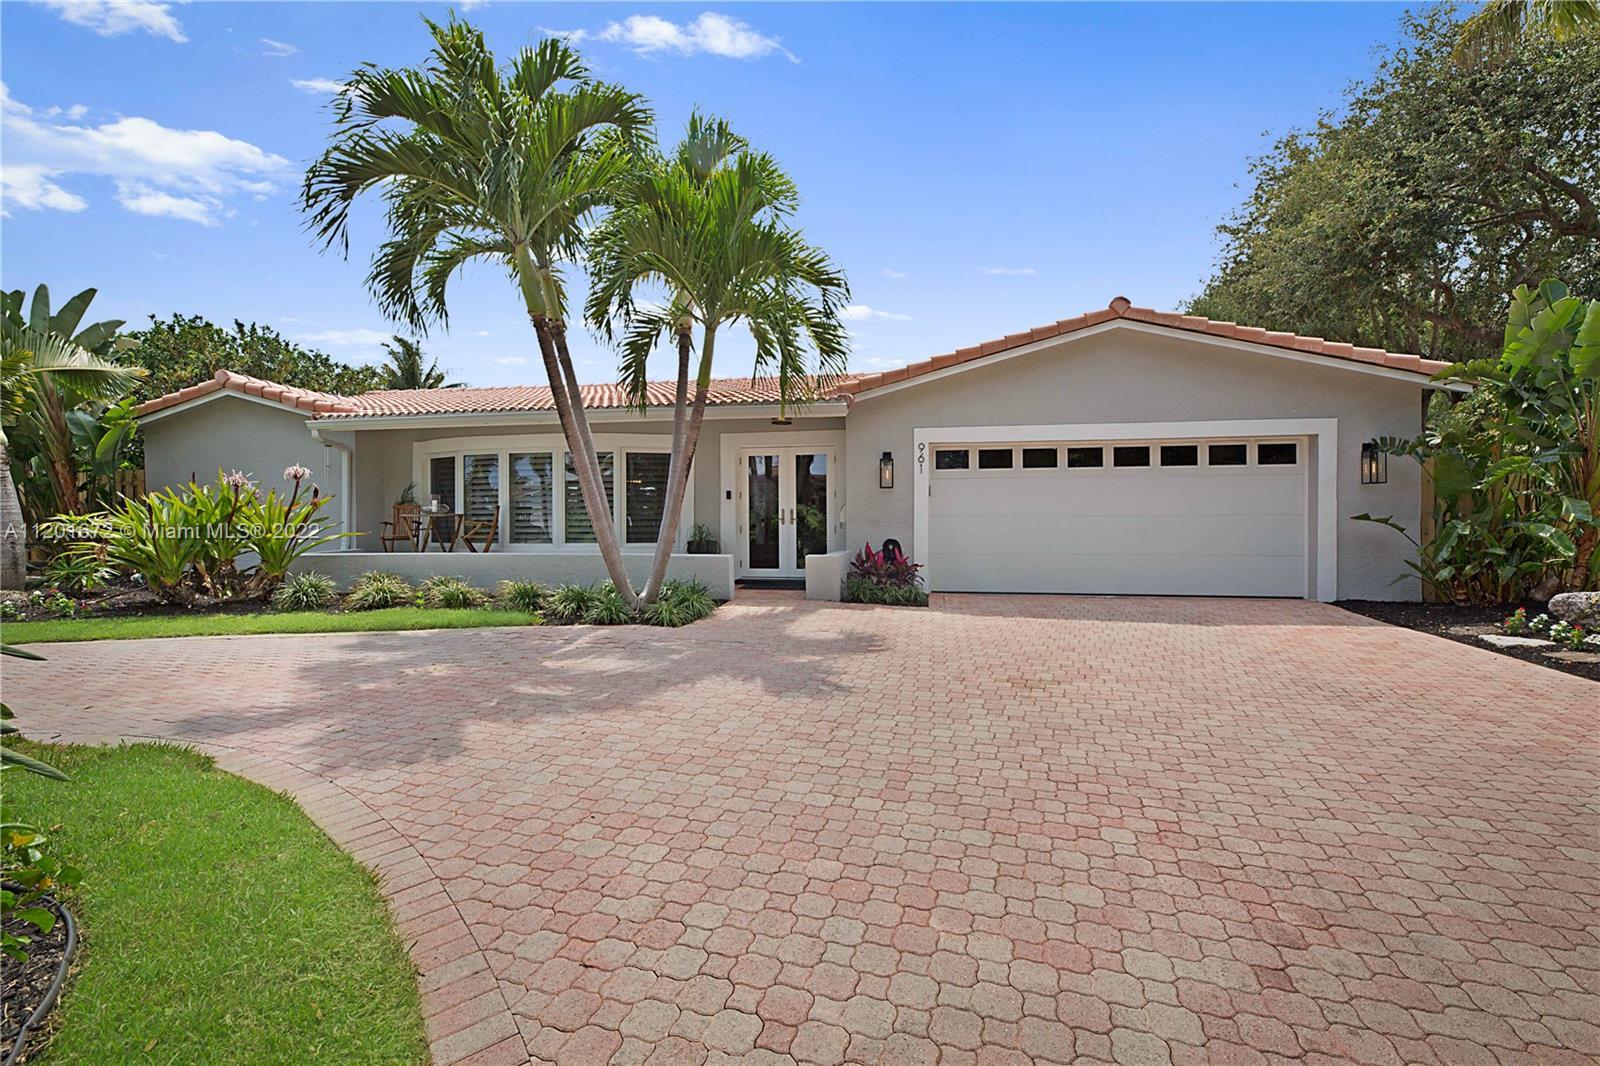 WELCOME TO PARADISE! Tucked in Pompano Beach's prestigious Harbor Village. Huge tropical fenced lot,